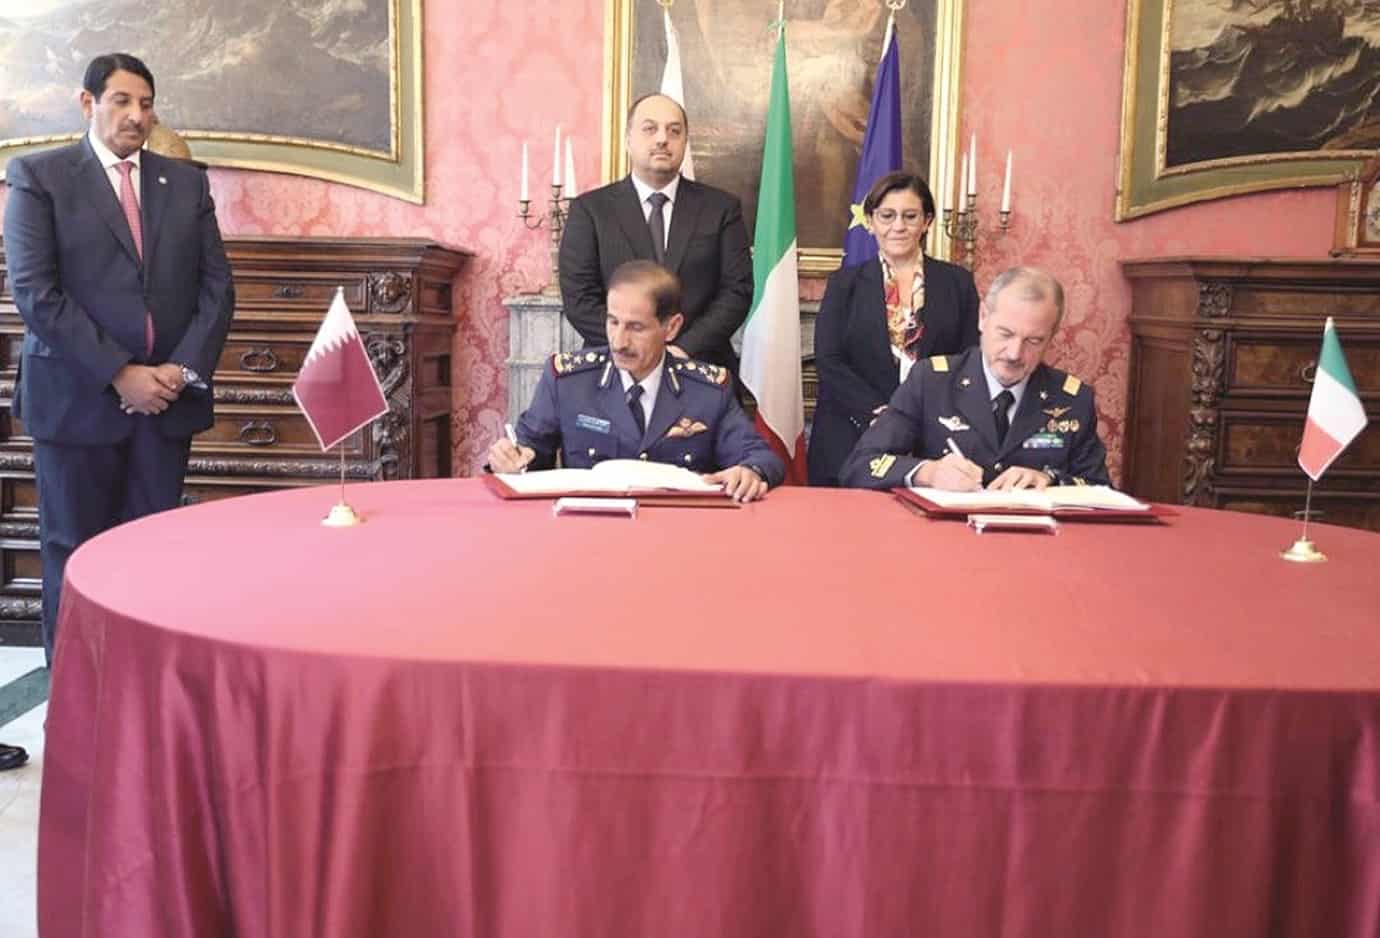 Defence minister holds talks in Italy, attends agreement signing ceremony